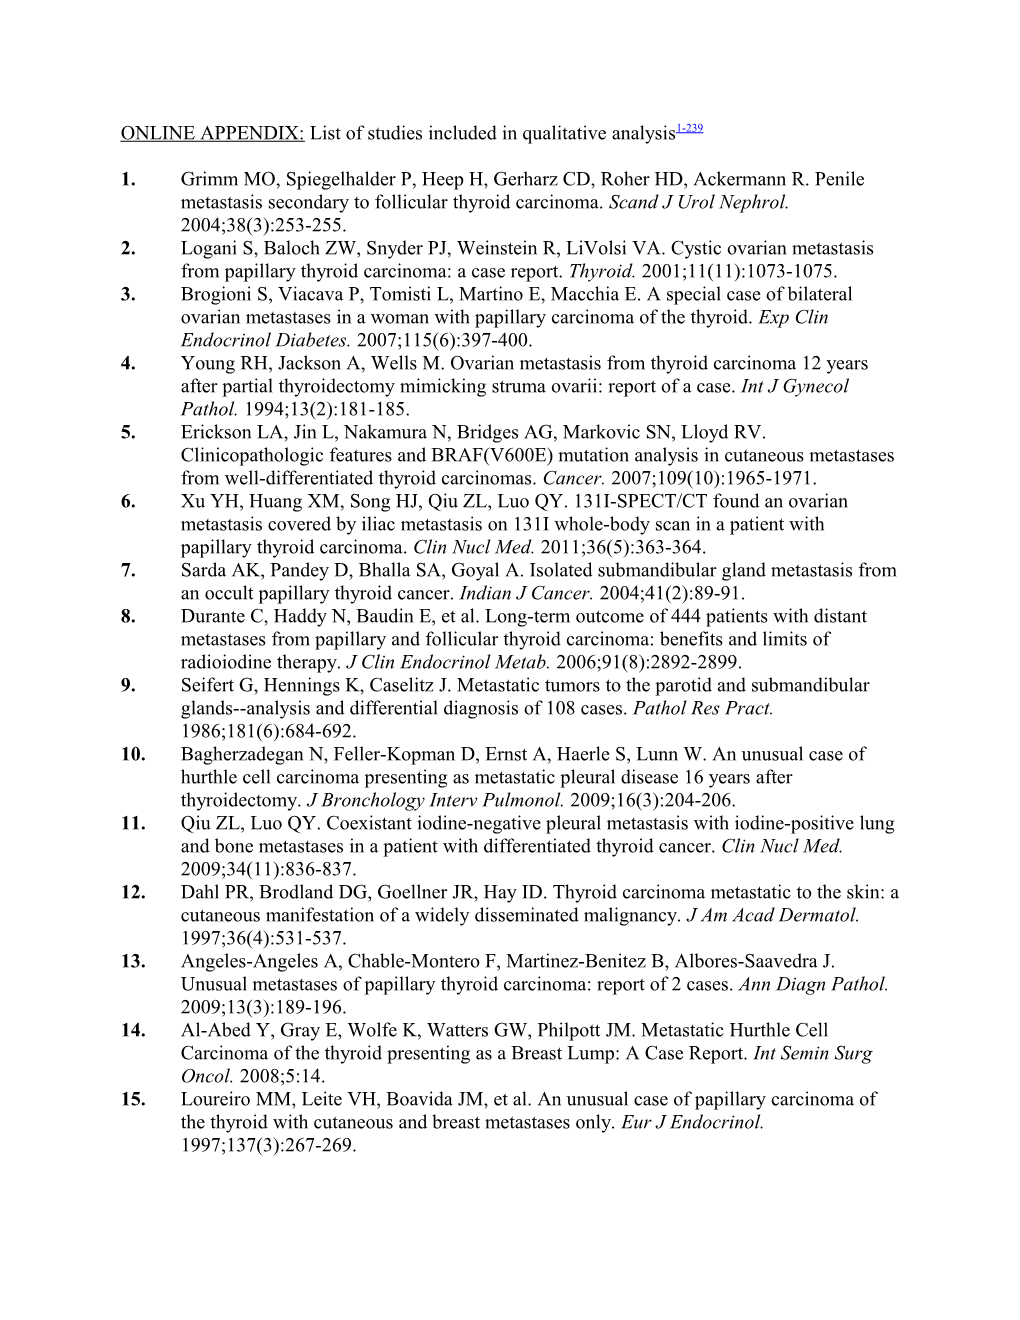 ONLINE APPENDIX: List of Studies Included in Qualitative Analysis1-239